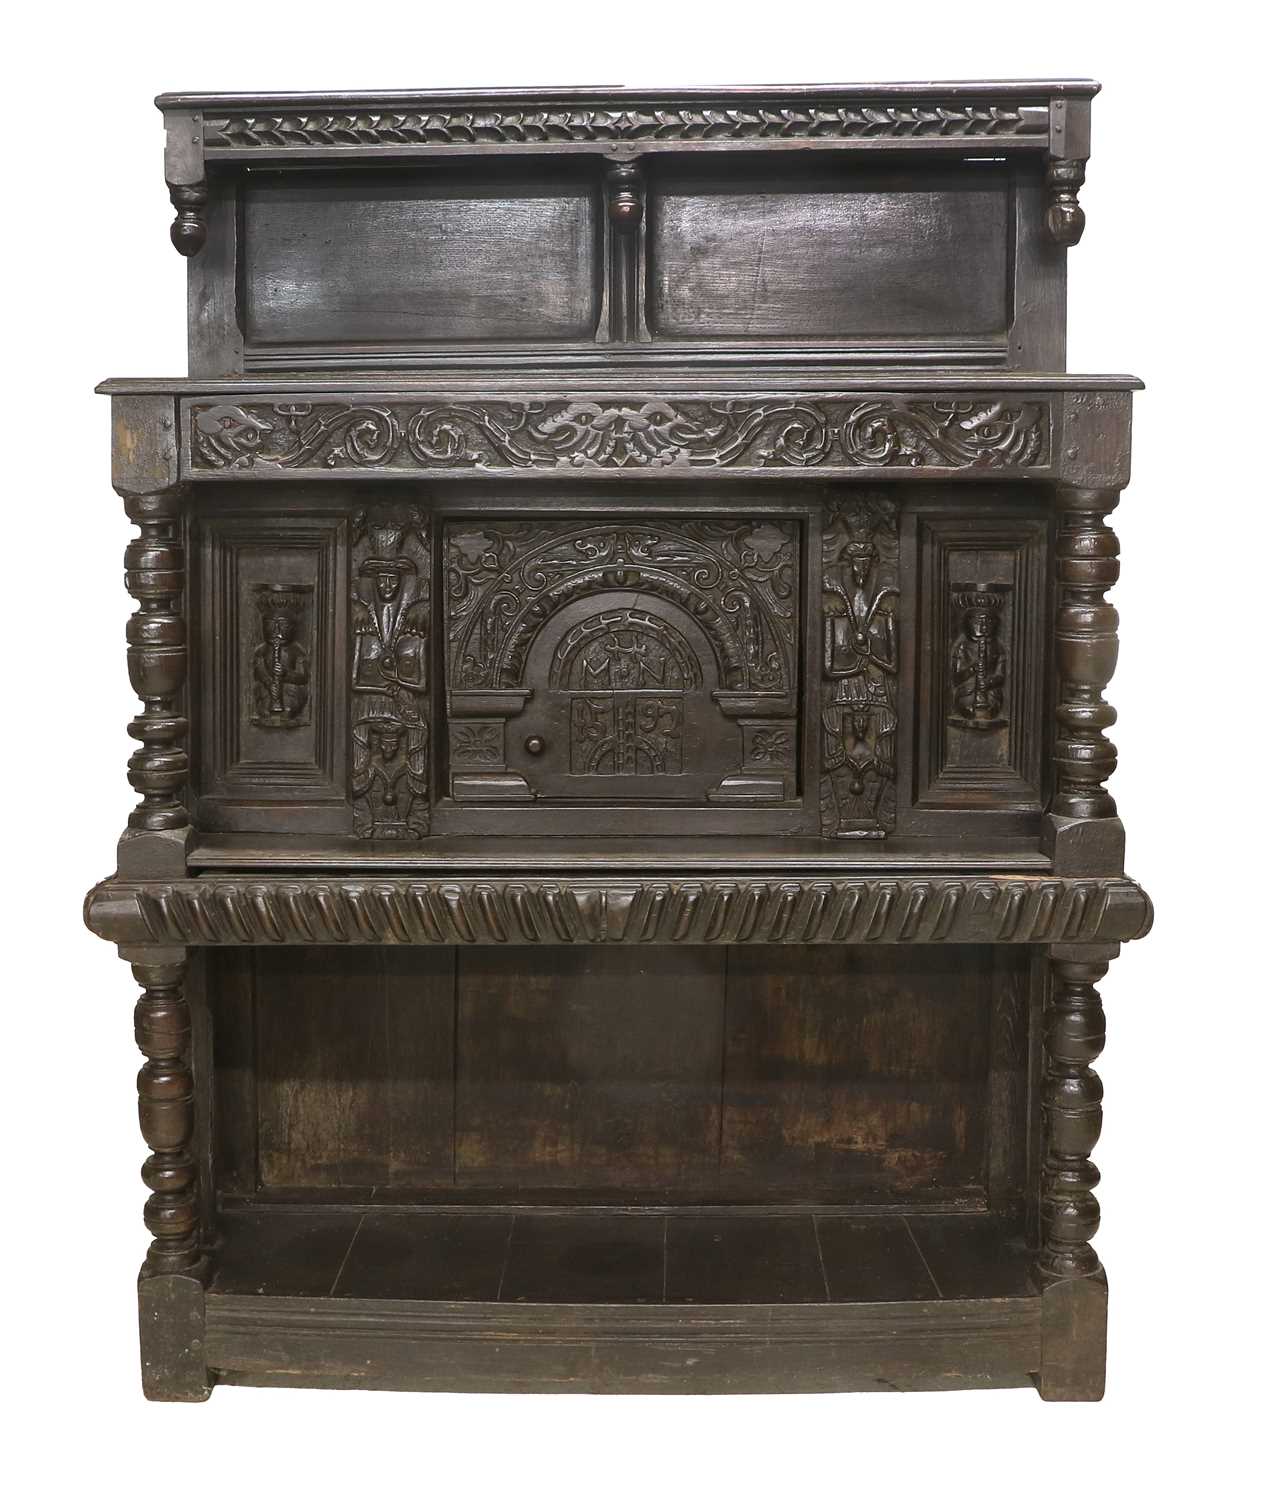 A Late 16th Century Carved Oak Livery Cupboard, initialled MHN and dated 1597, the superstructure